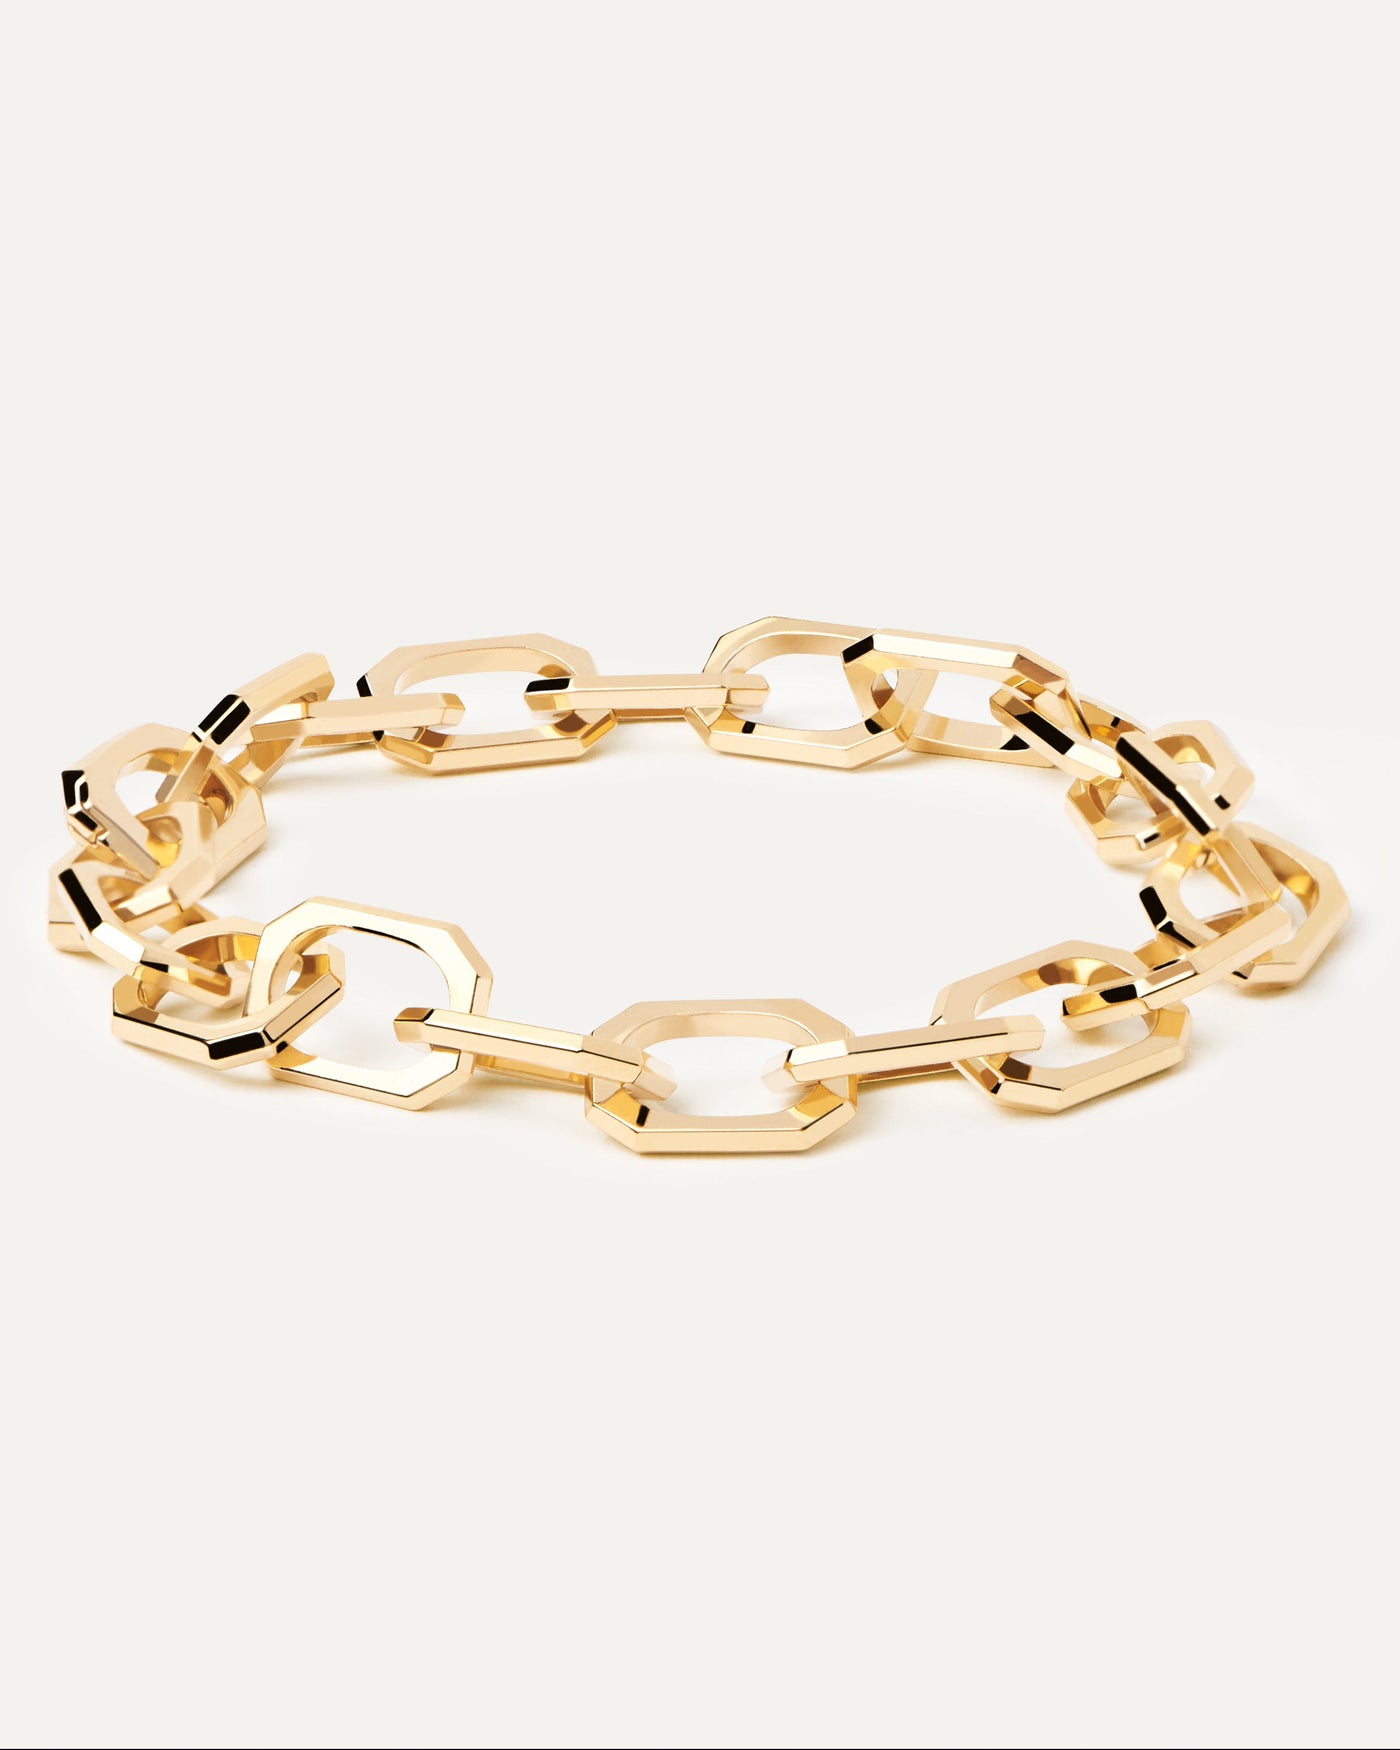 2023 Selection | Small Signature Chain Bracelet. Cable chain bracelet with octogonal links in 18K gold plating. Get the latest arrival from PDPAOLA. Place your order safely and get this Best Seller. Free Shipping.